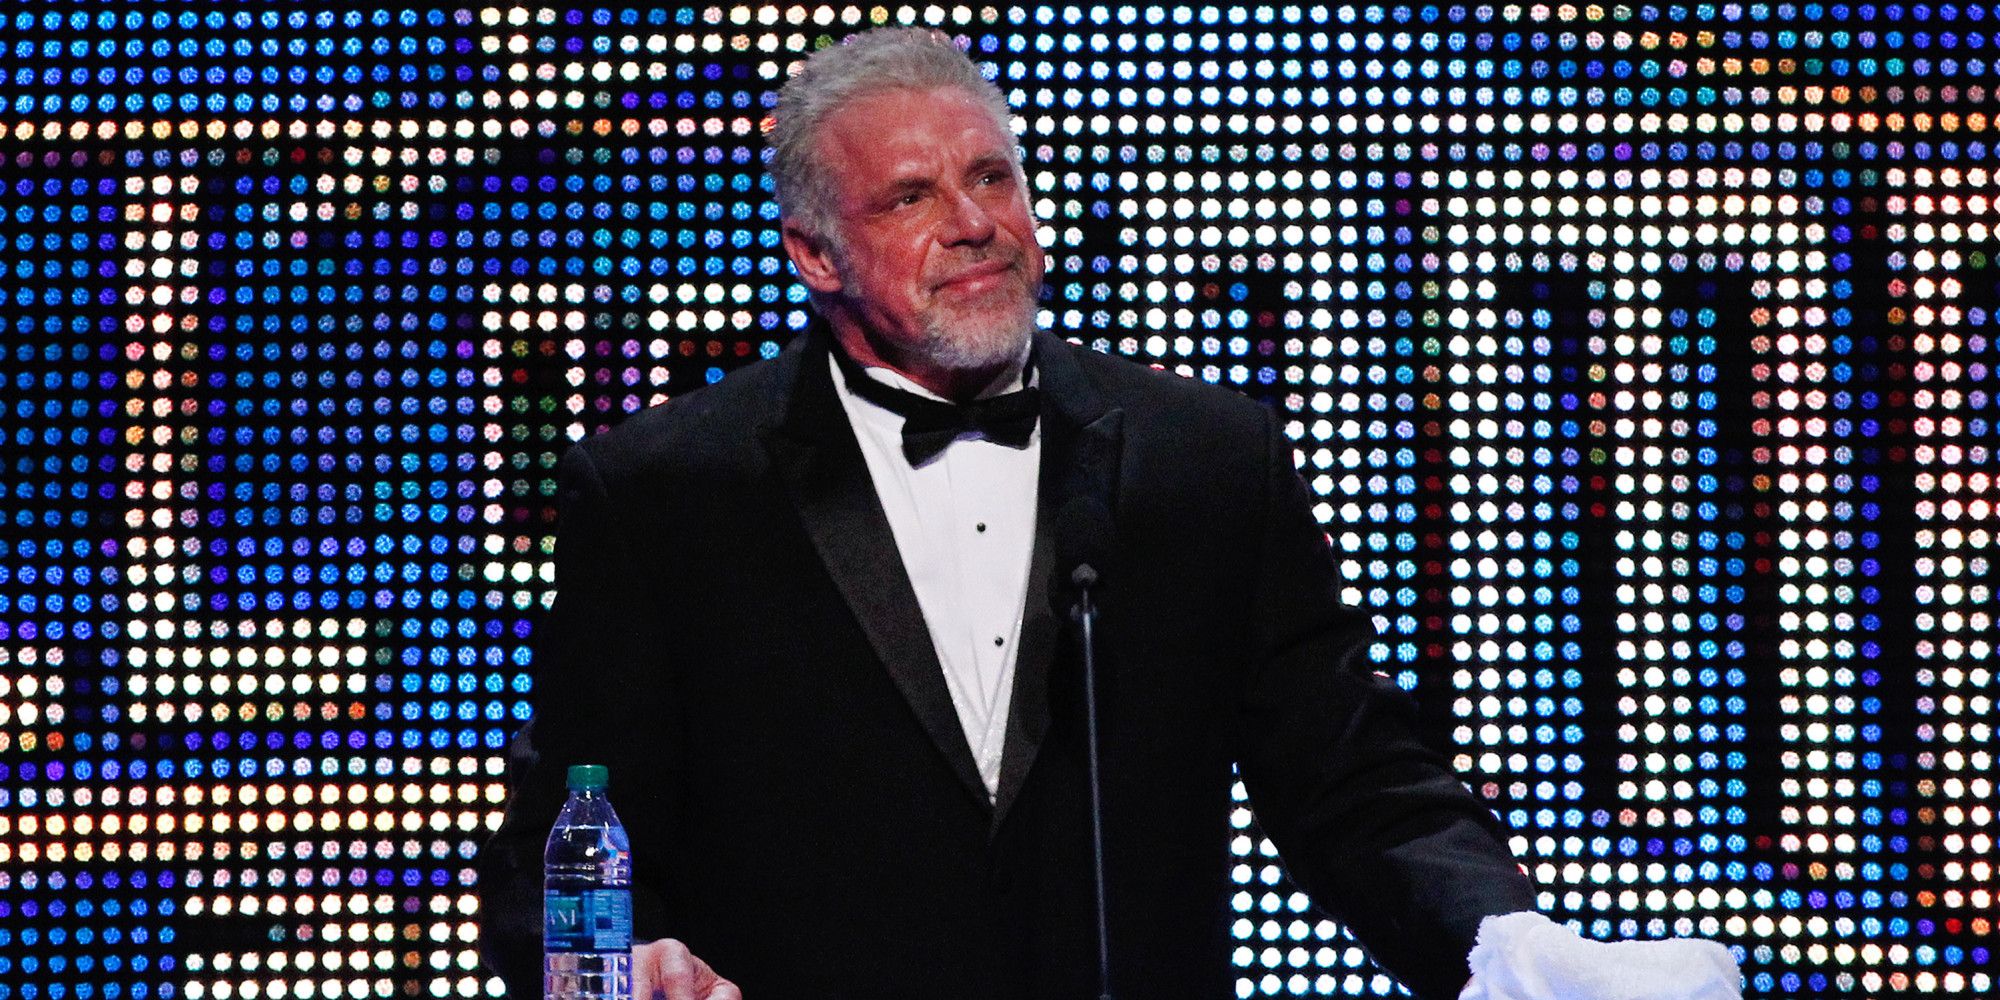 The Ultimate Warrior at the WWE Hall Of Fame